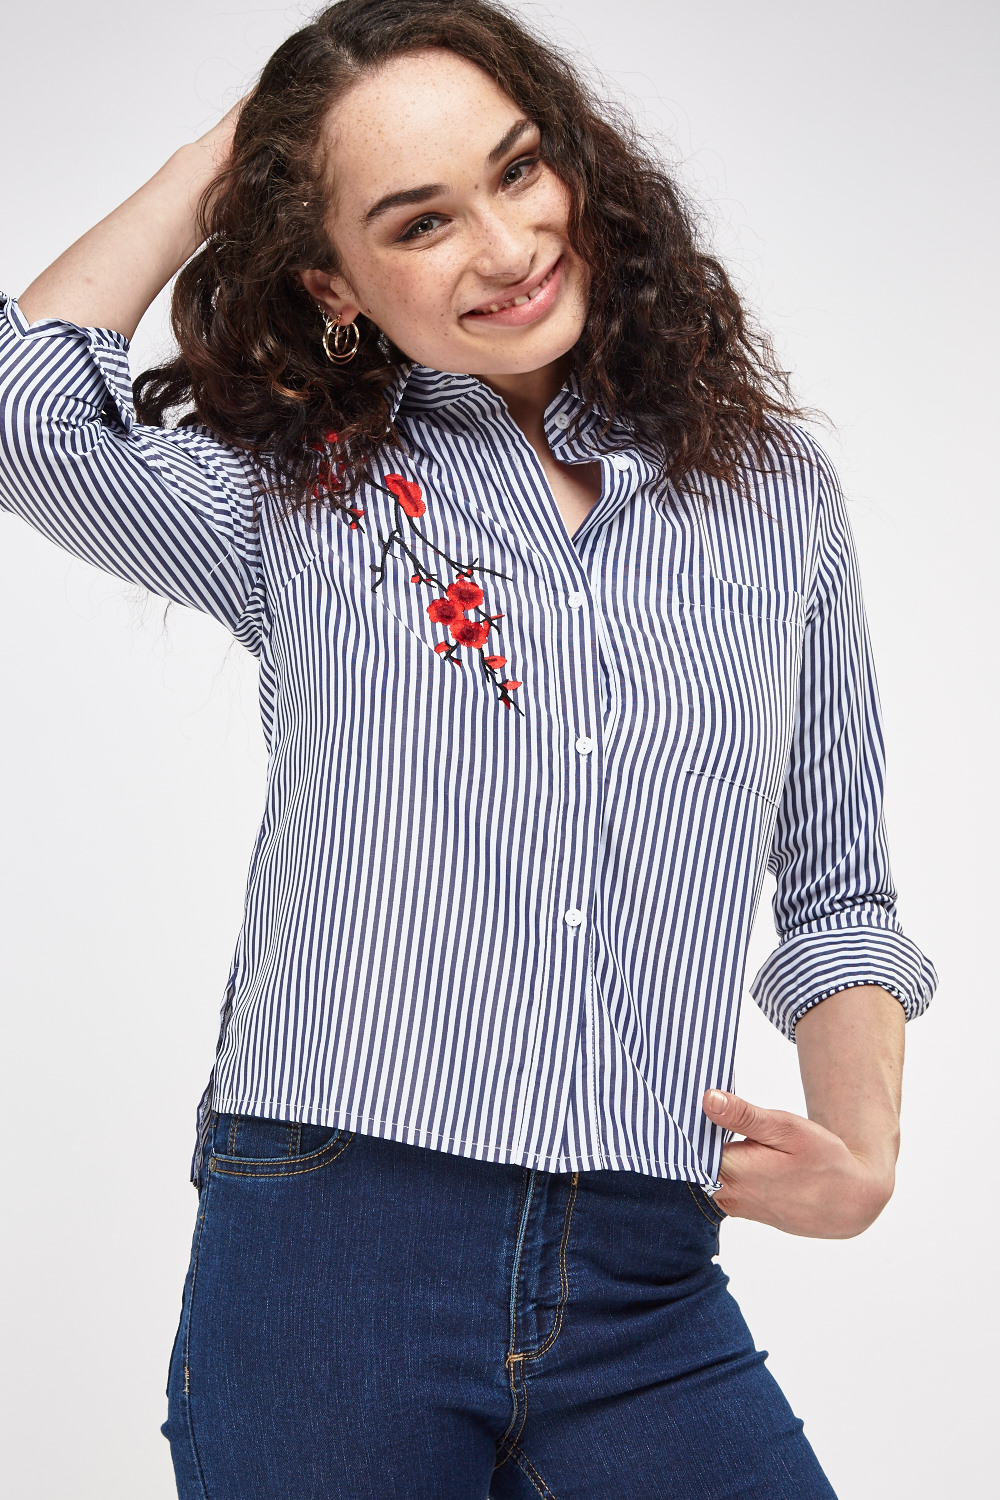 Embroidered Striped Shirt - Just $6